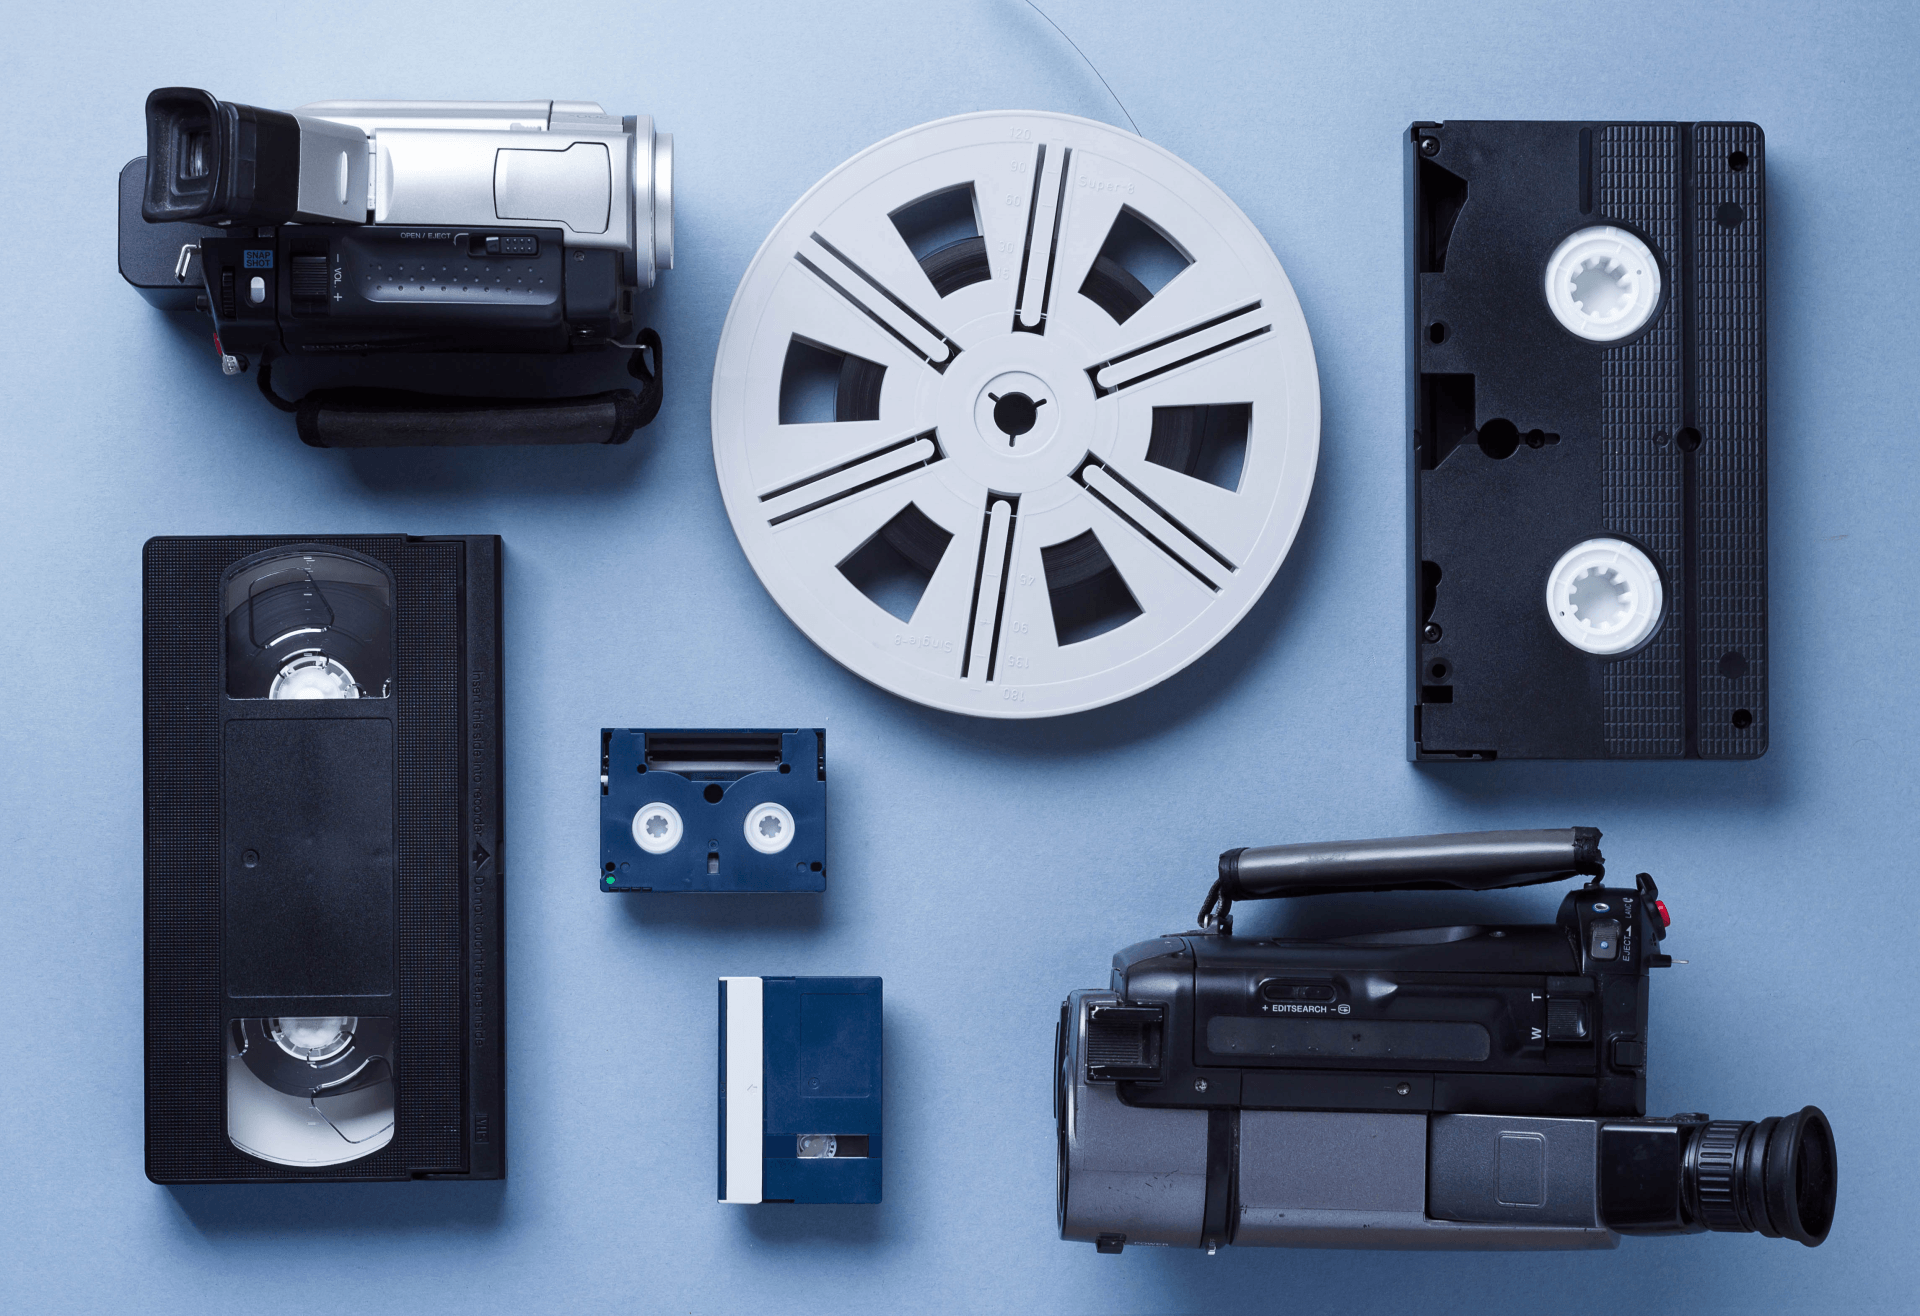 Video Transfer Home Videos: How Do I Convert Film and VHS to Digital?